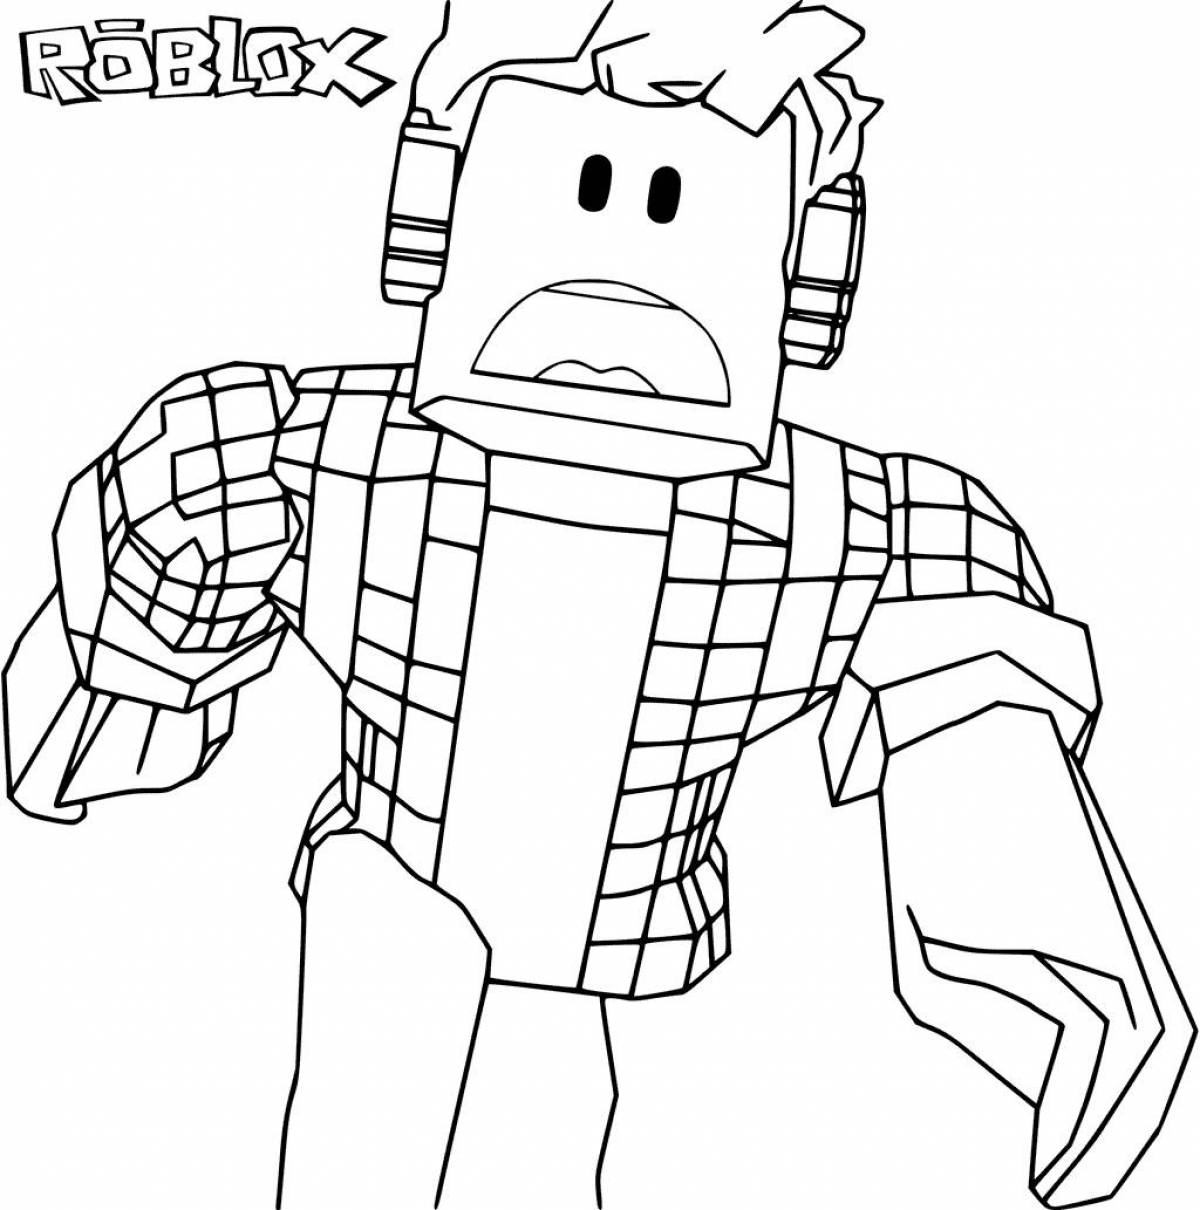 A fun roblox coloring book for kids